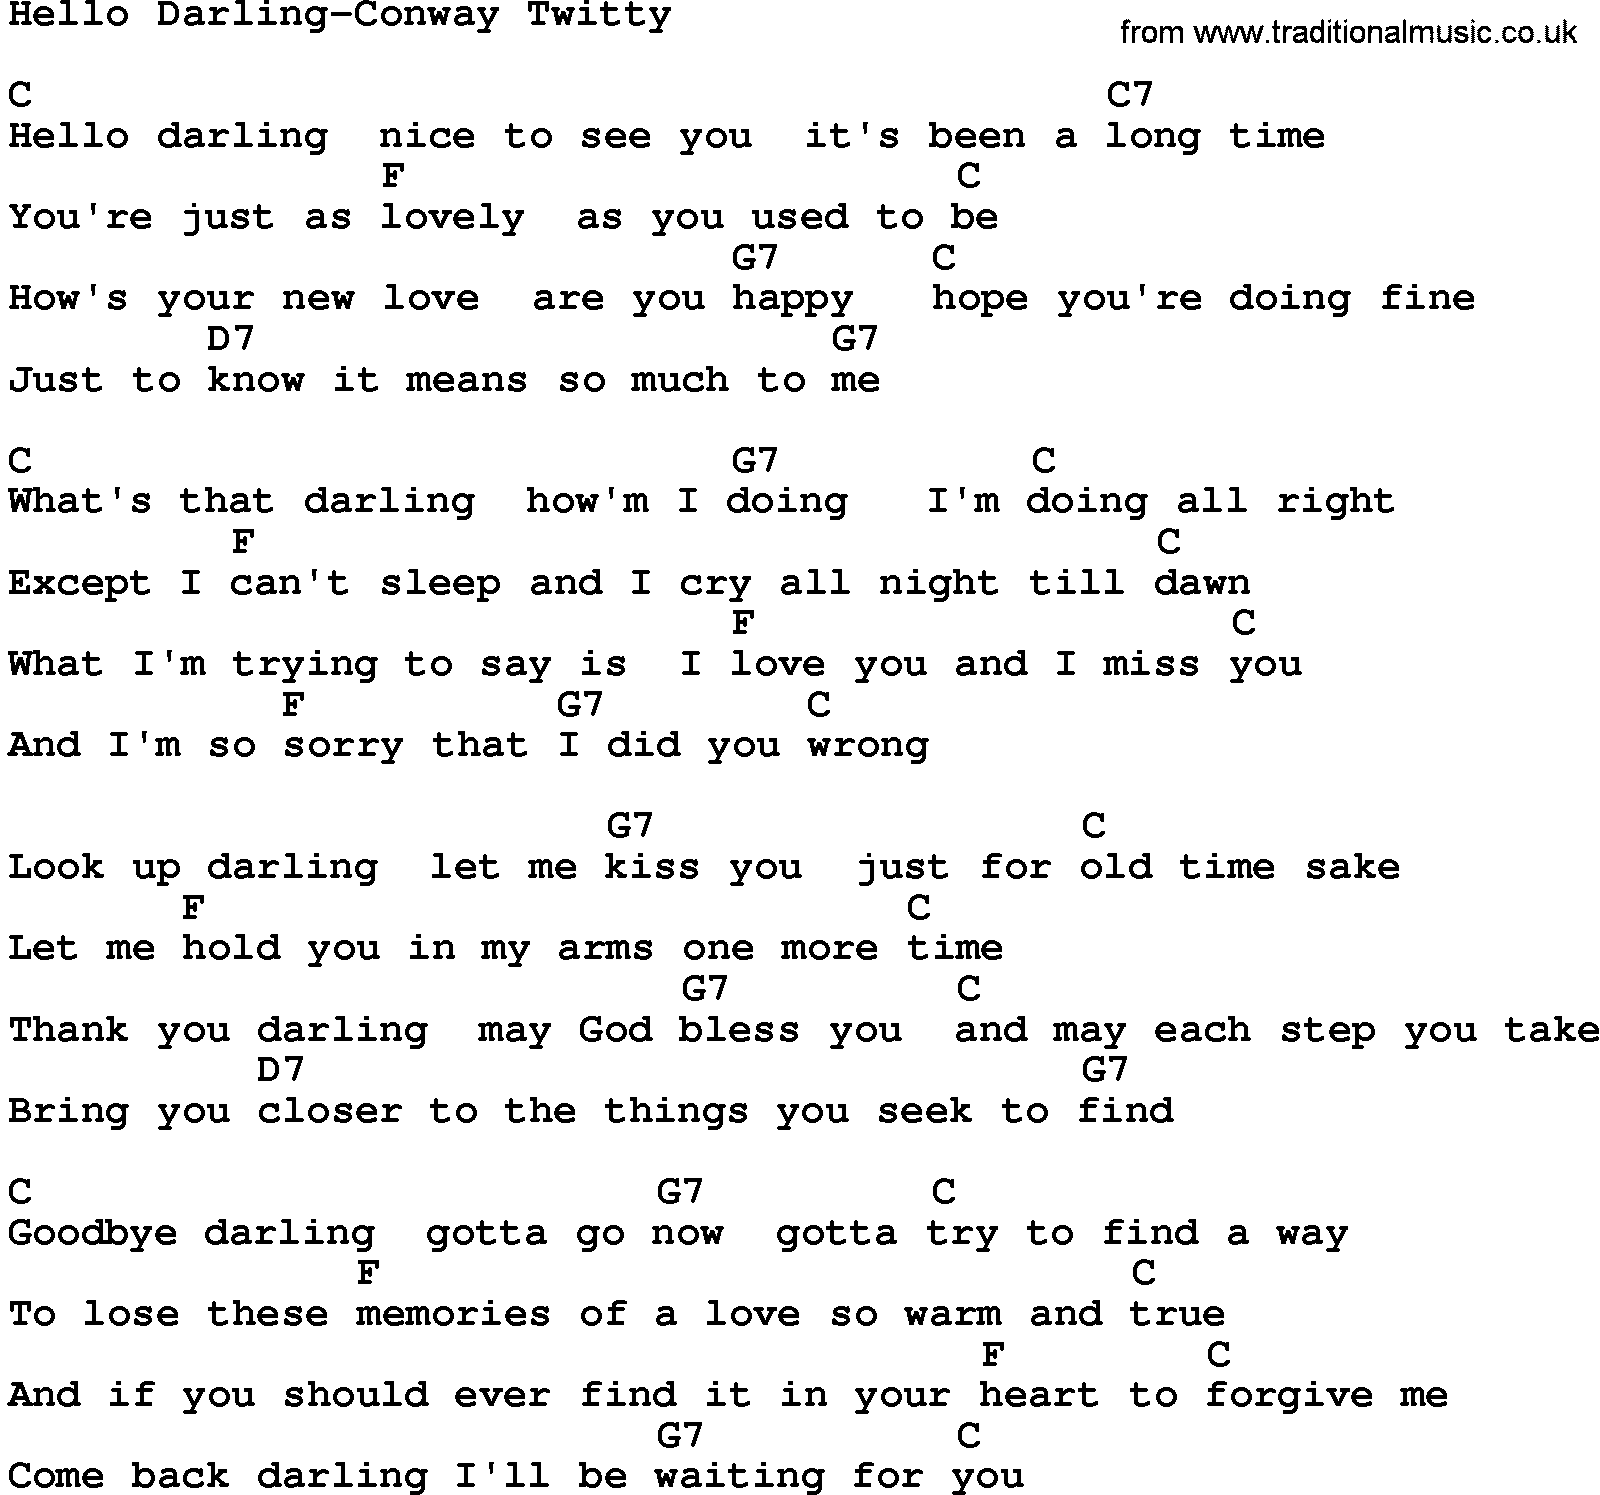 Country music song: Hello Darling-Conway Twitty lyrics and chords